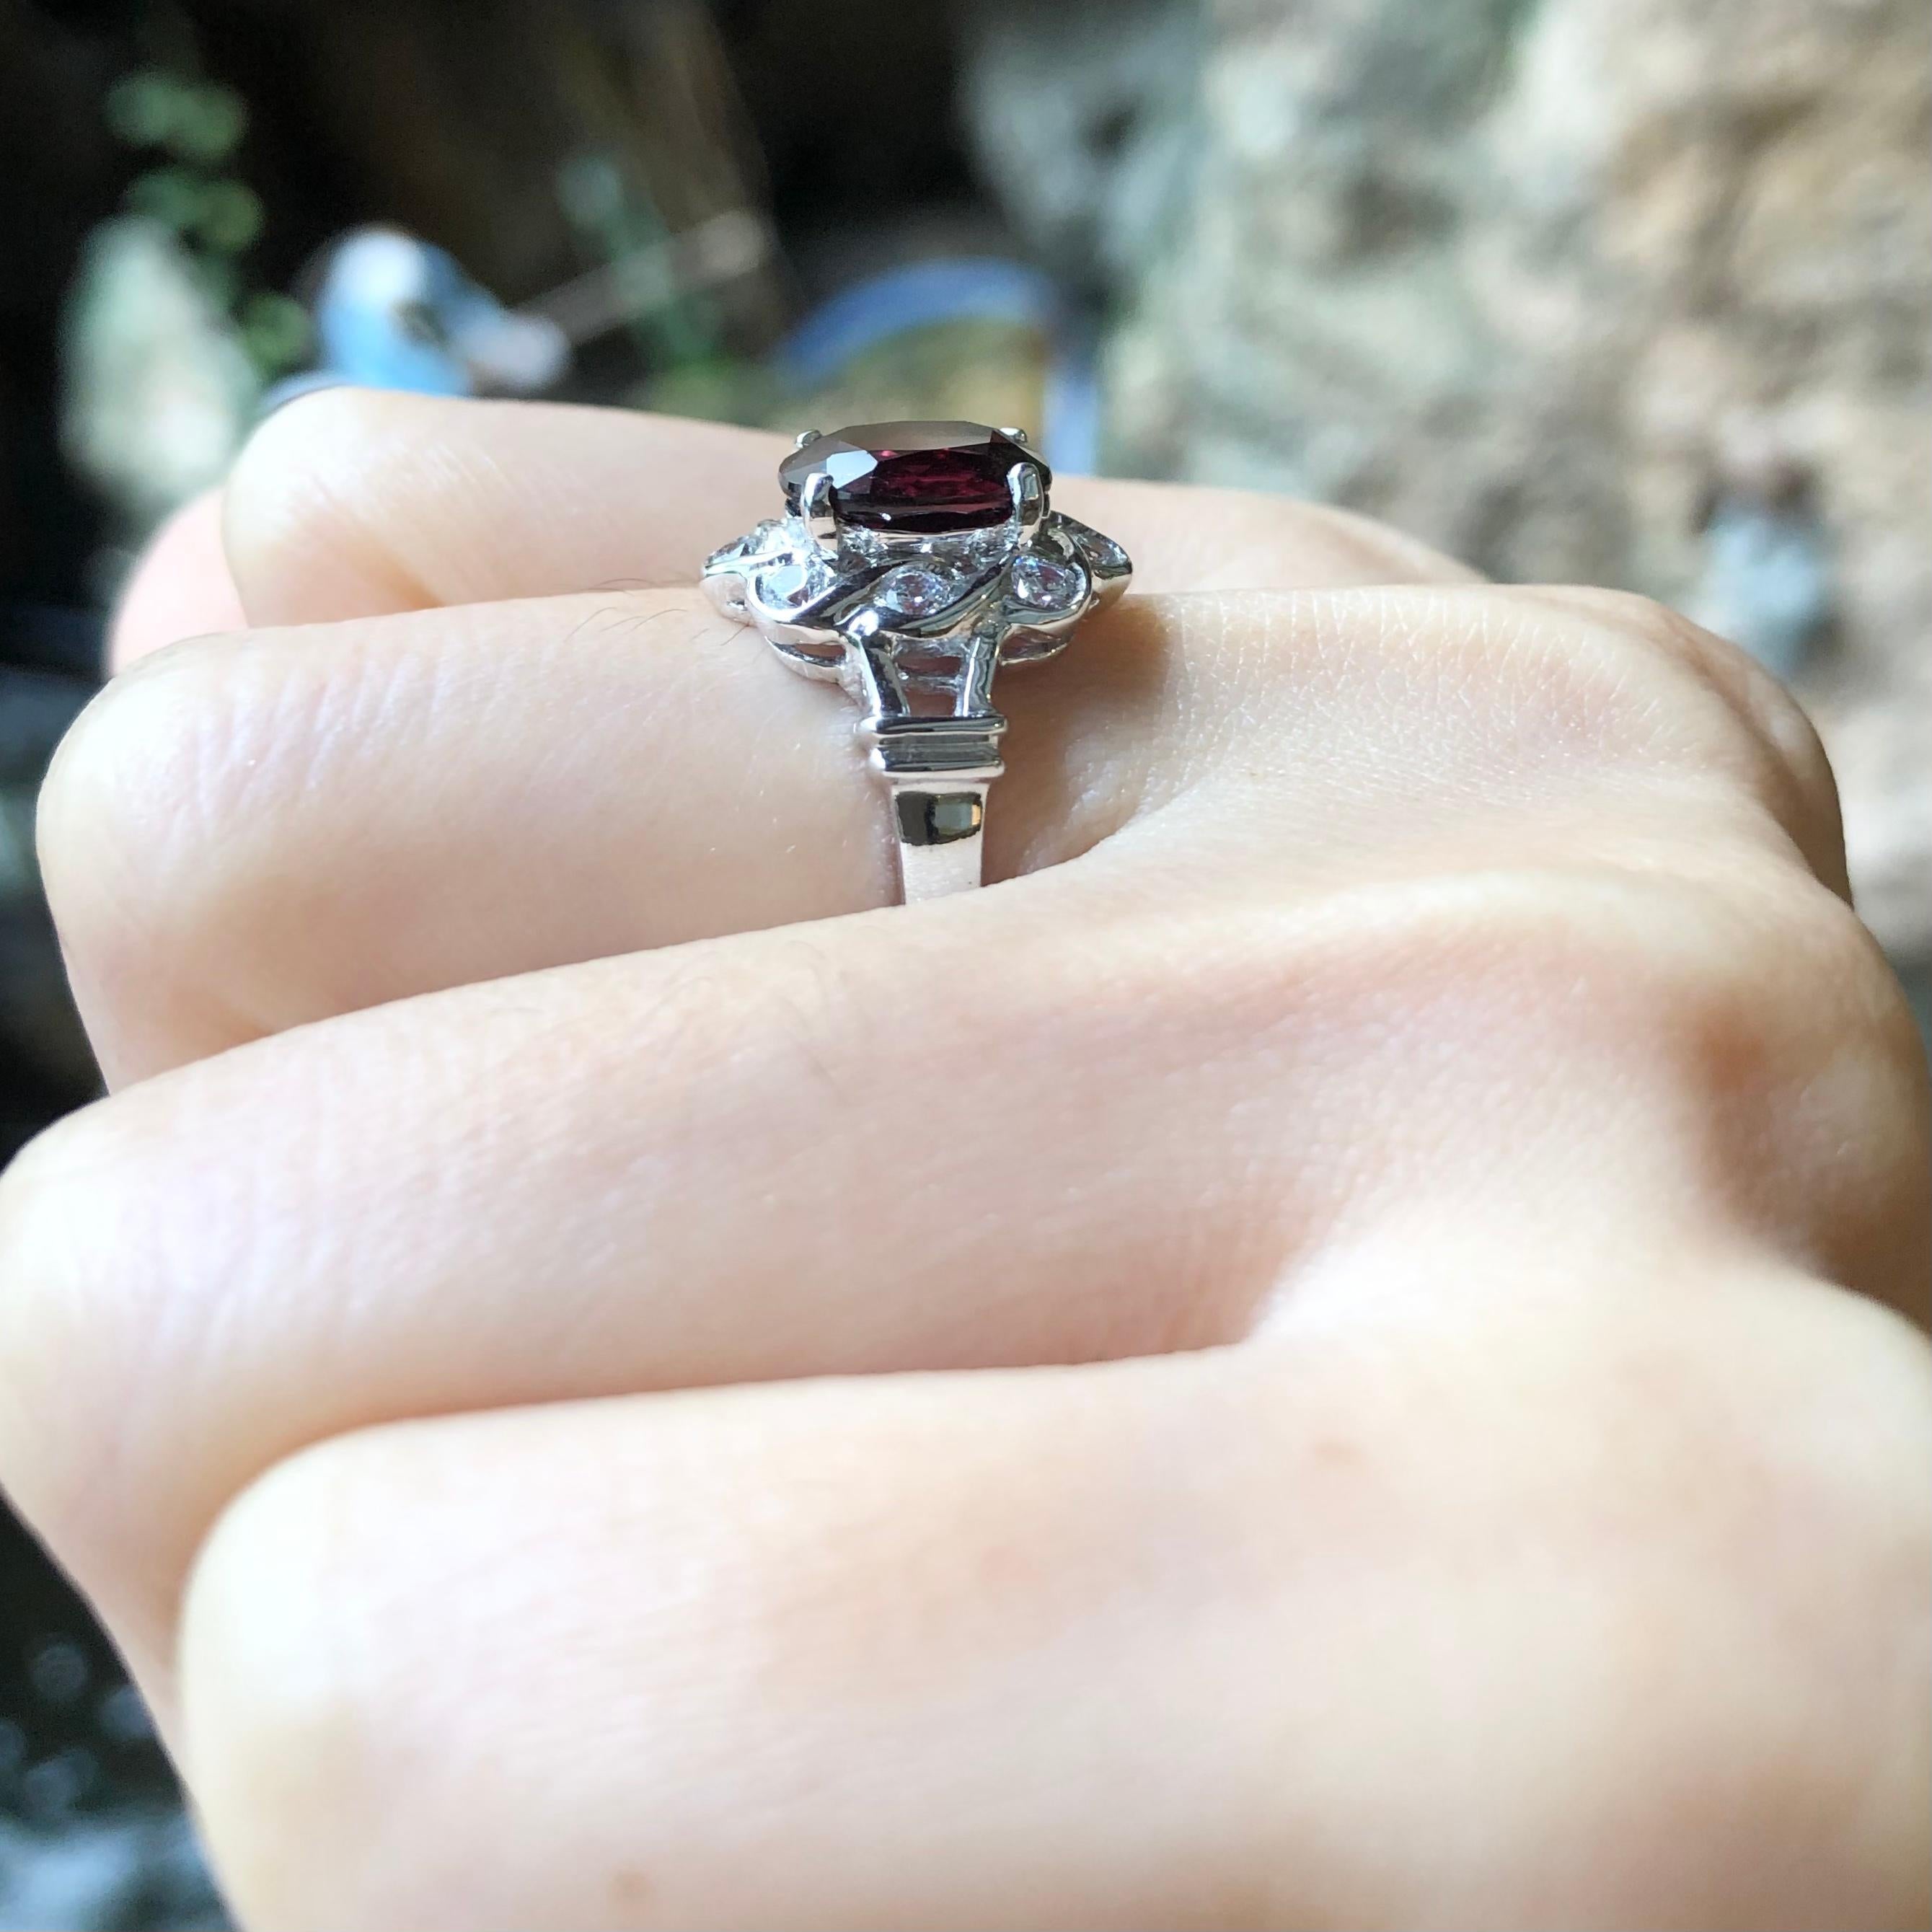 Rhodolite with Cubic Zirconia Ring set in Silver Settings

Width:  1.1 cm 
Length: 1.5 cm
Ring Size: 50
Total Weight: 4.04 grams

*Please note that the silver setting is plated with rhodium to promote shine and help prevent oxidation.  However, with